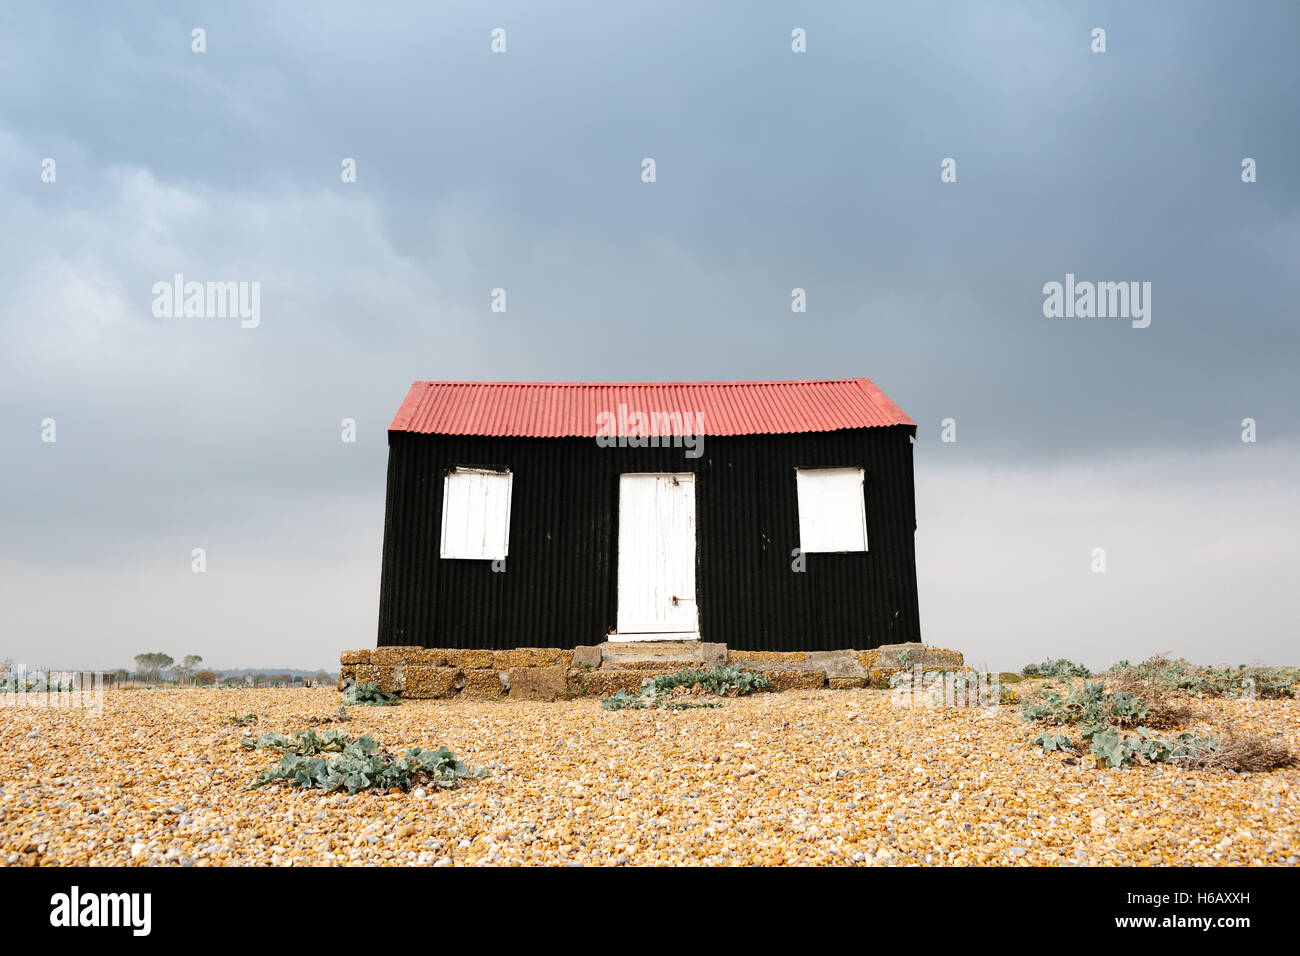 The famous red hut at Rye Harbour on the south coast of Rye, England Stock Photo